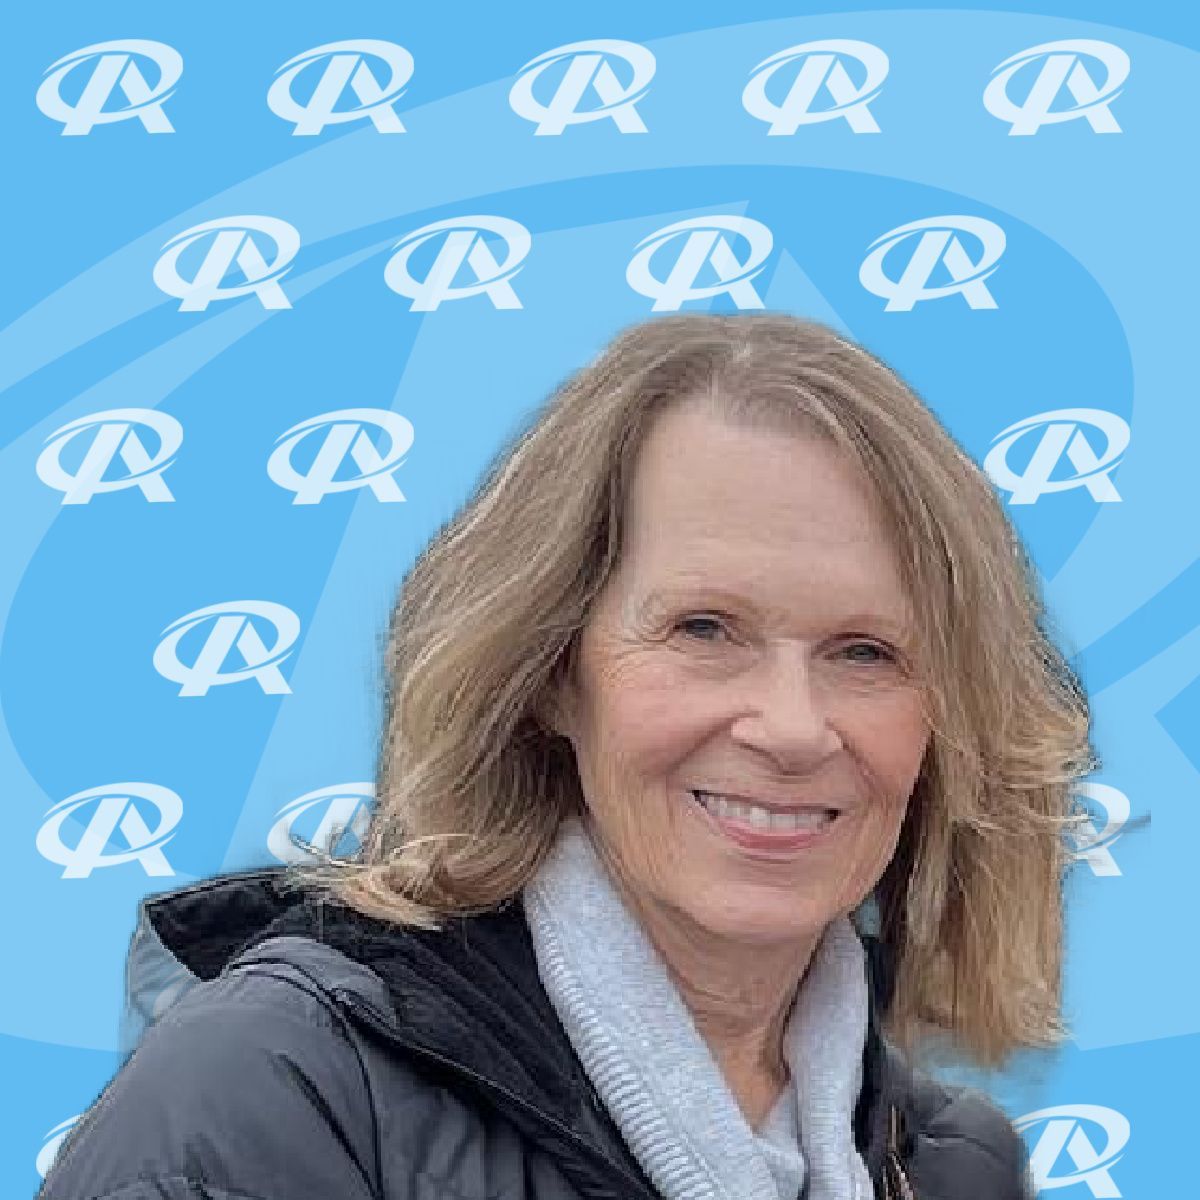 A woman is smiling in front of a blue background with the letter r on it